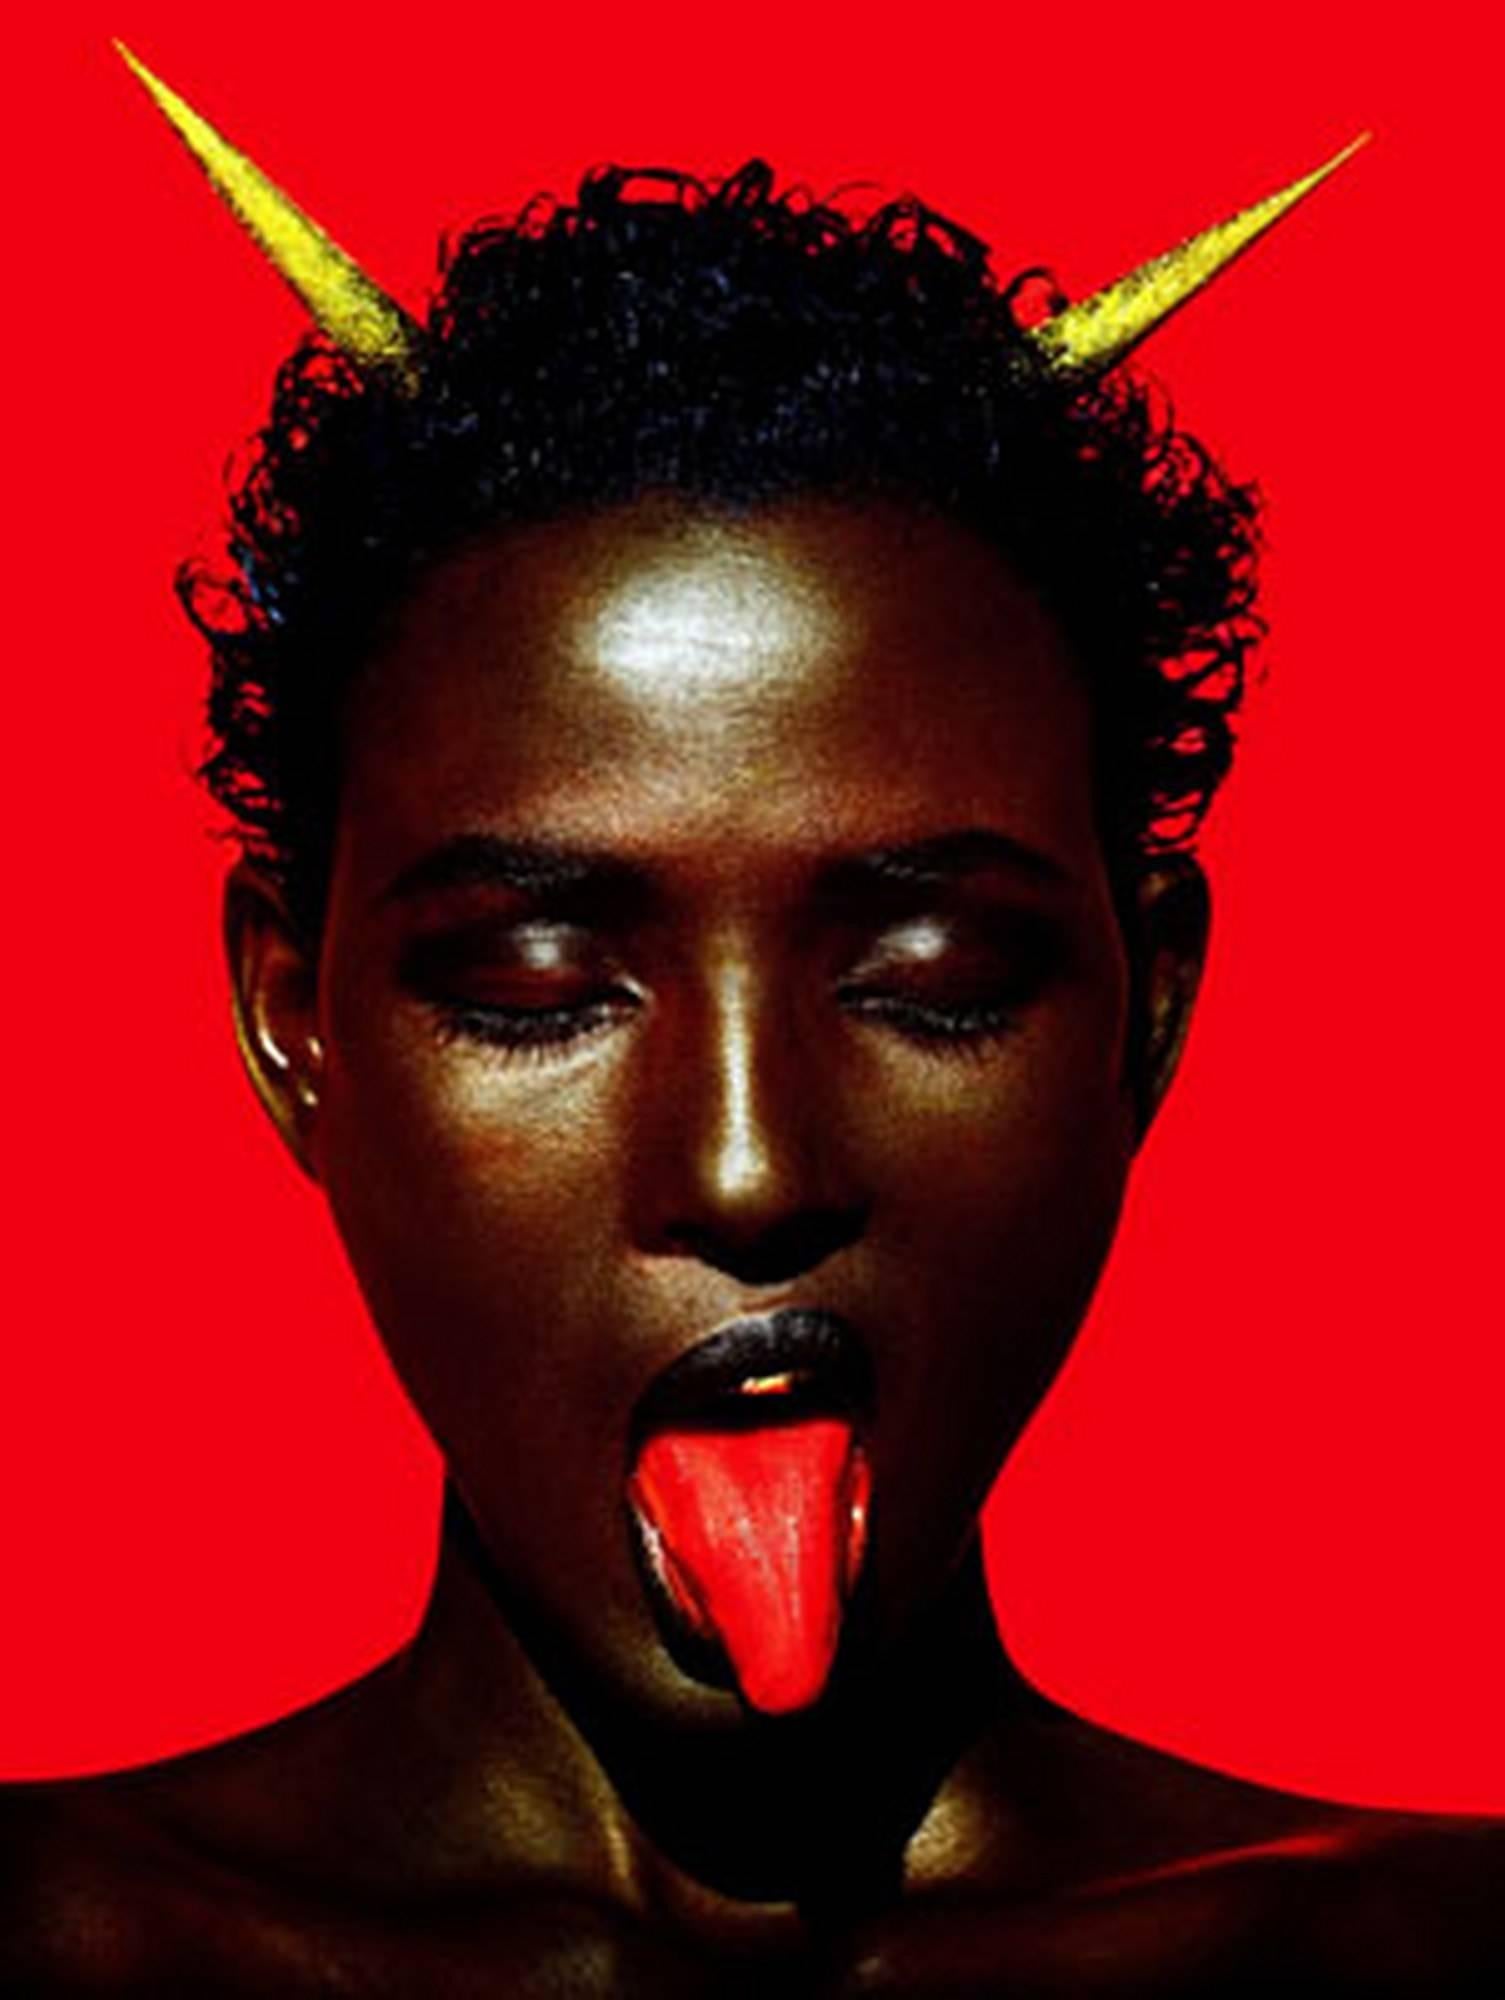 Waris Dirie Marrakech - iconic supermodel with red in the background